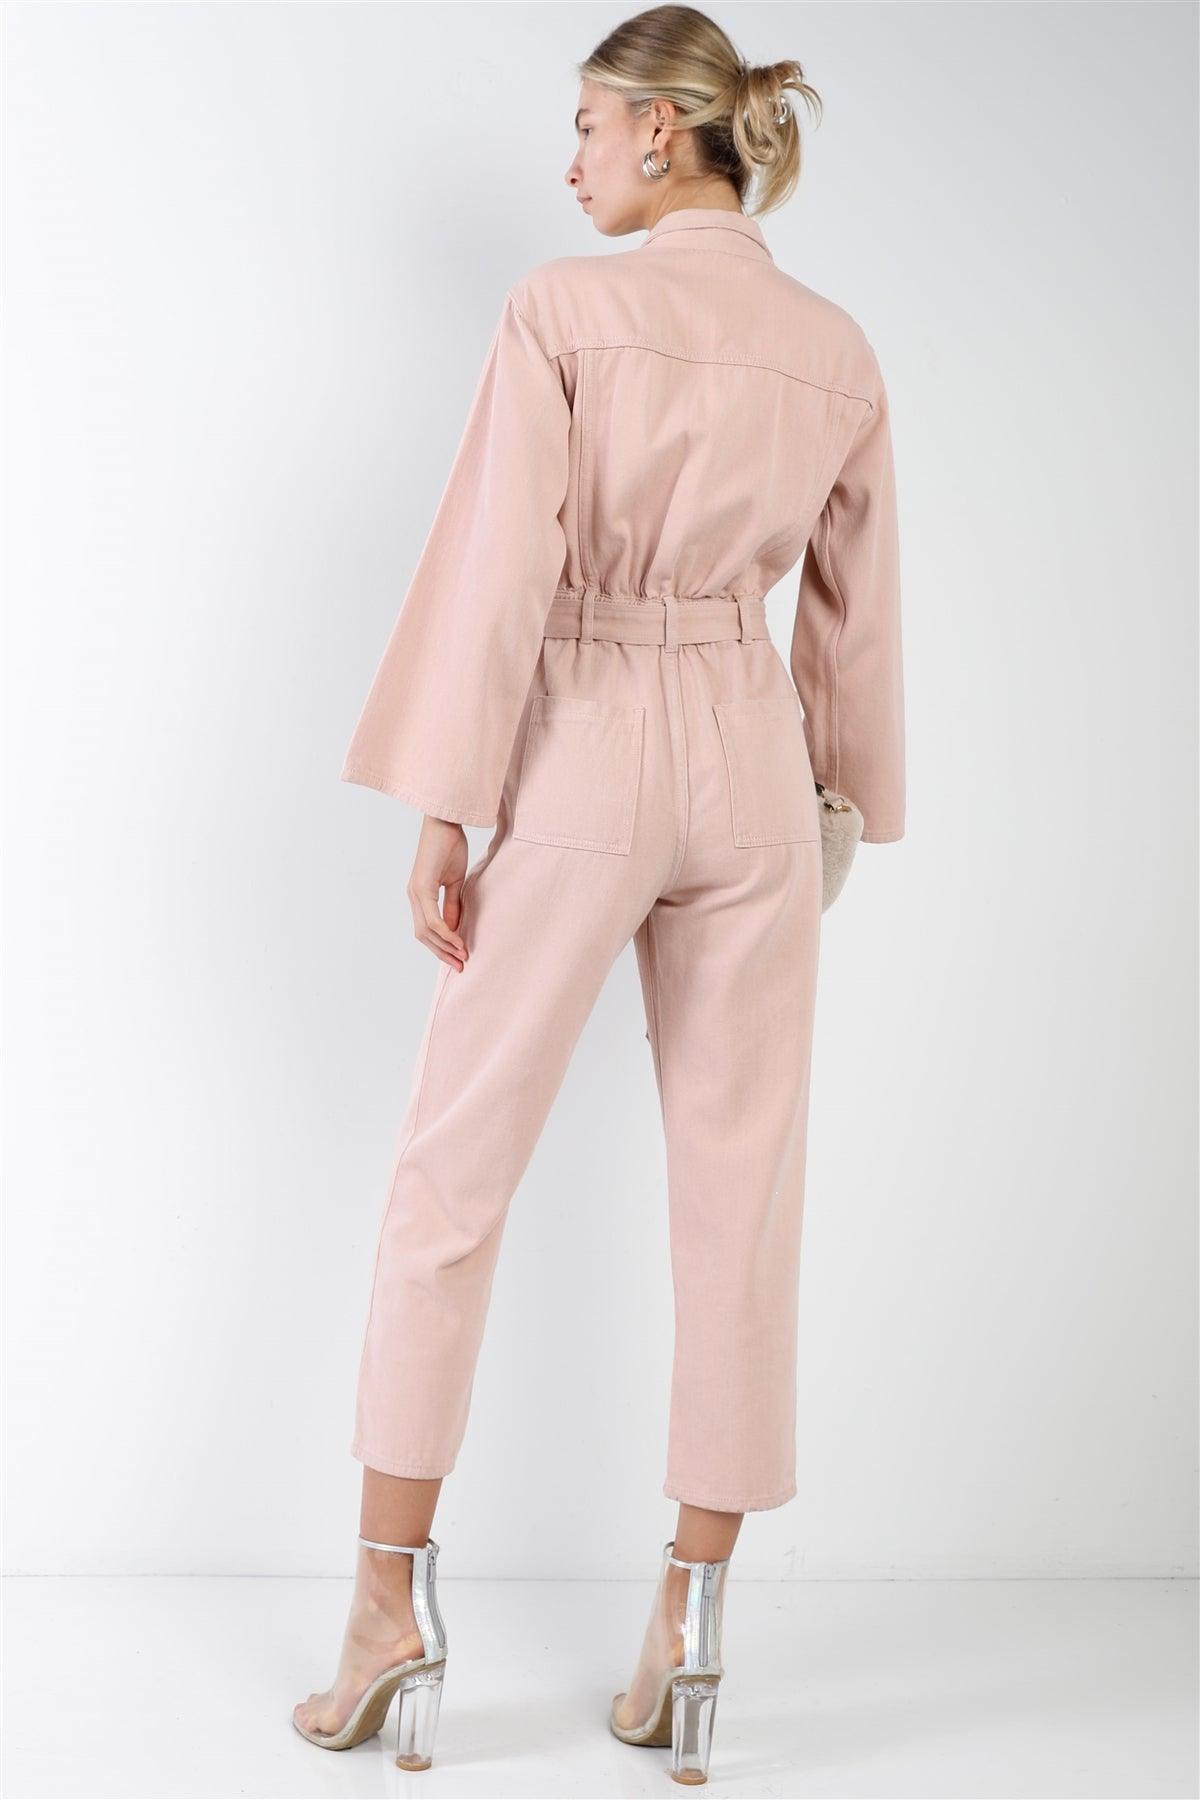 Blush Long Sleeve Denim Utility Front Button Down Self-Tie Belted Jumpsuit /4-2-1